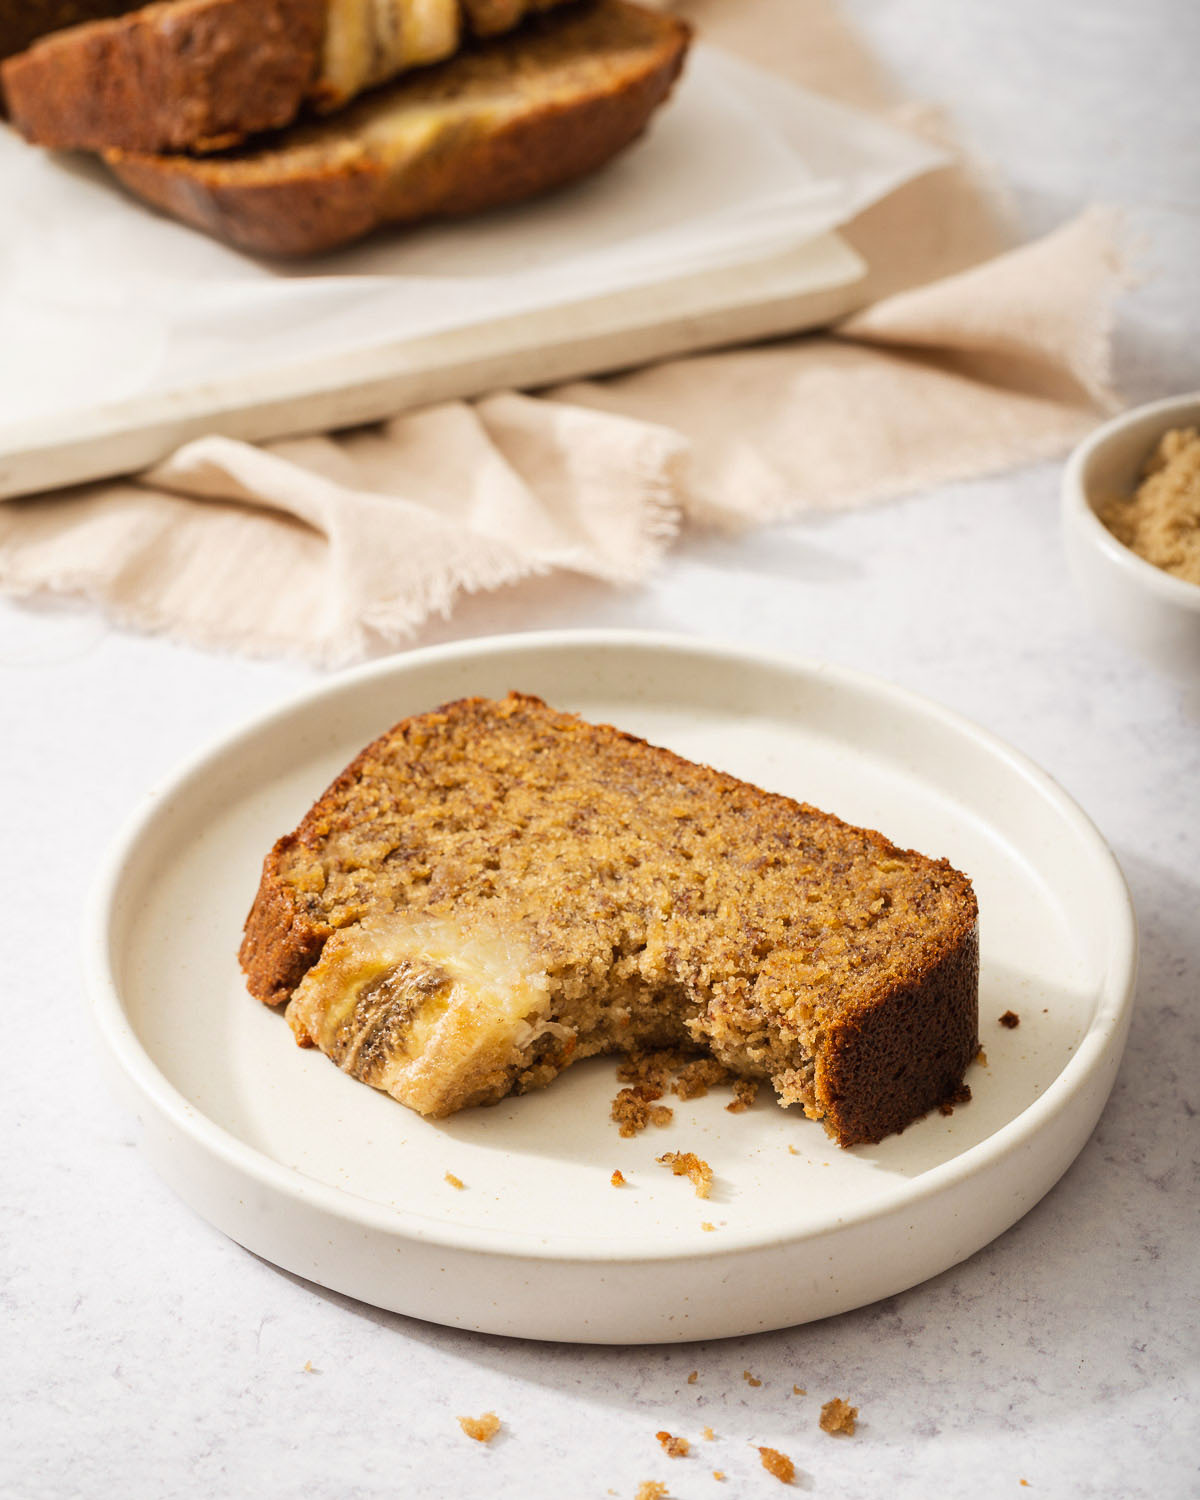 A slice of miso banana bread with a bite out of it on a small plate.